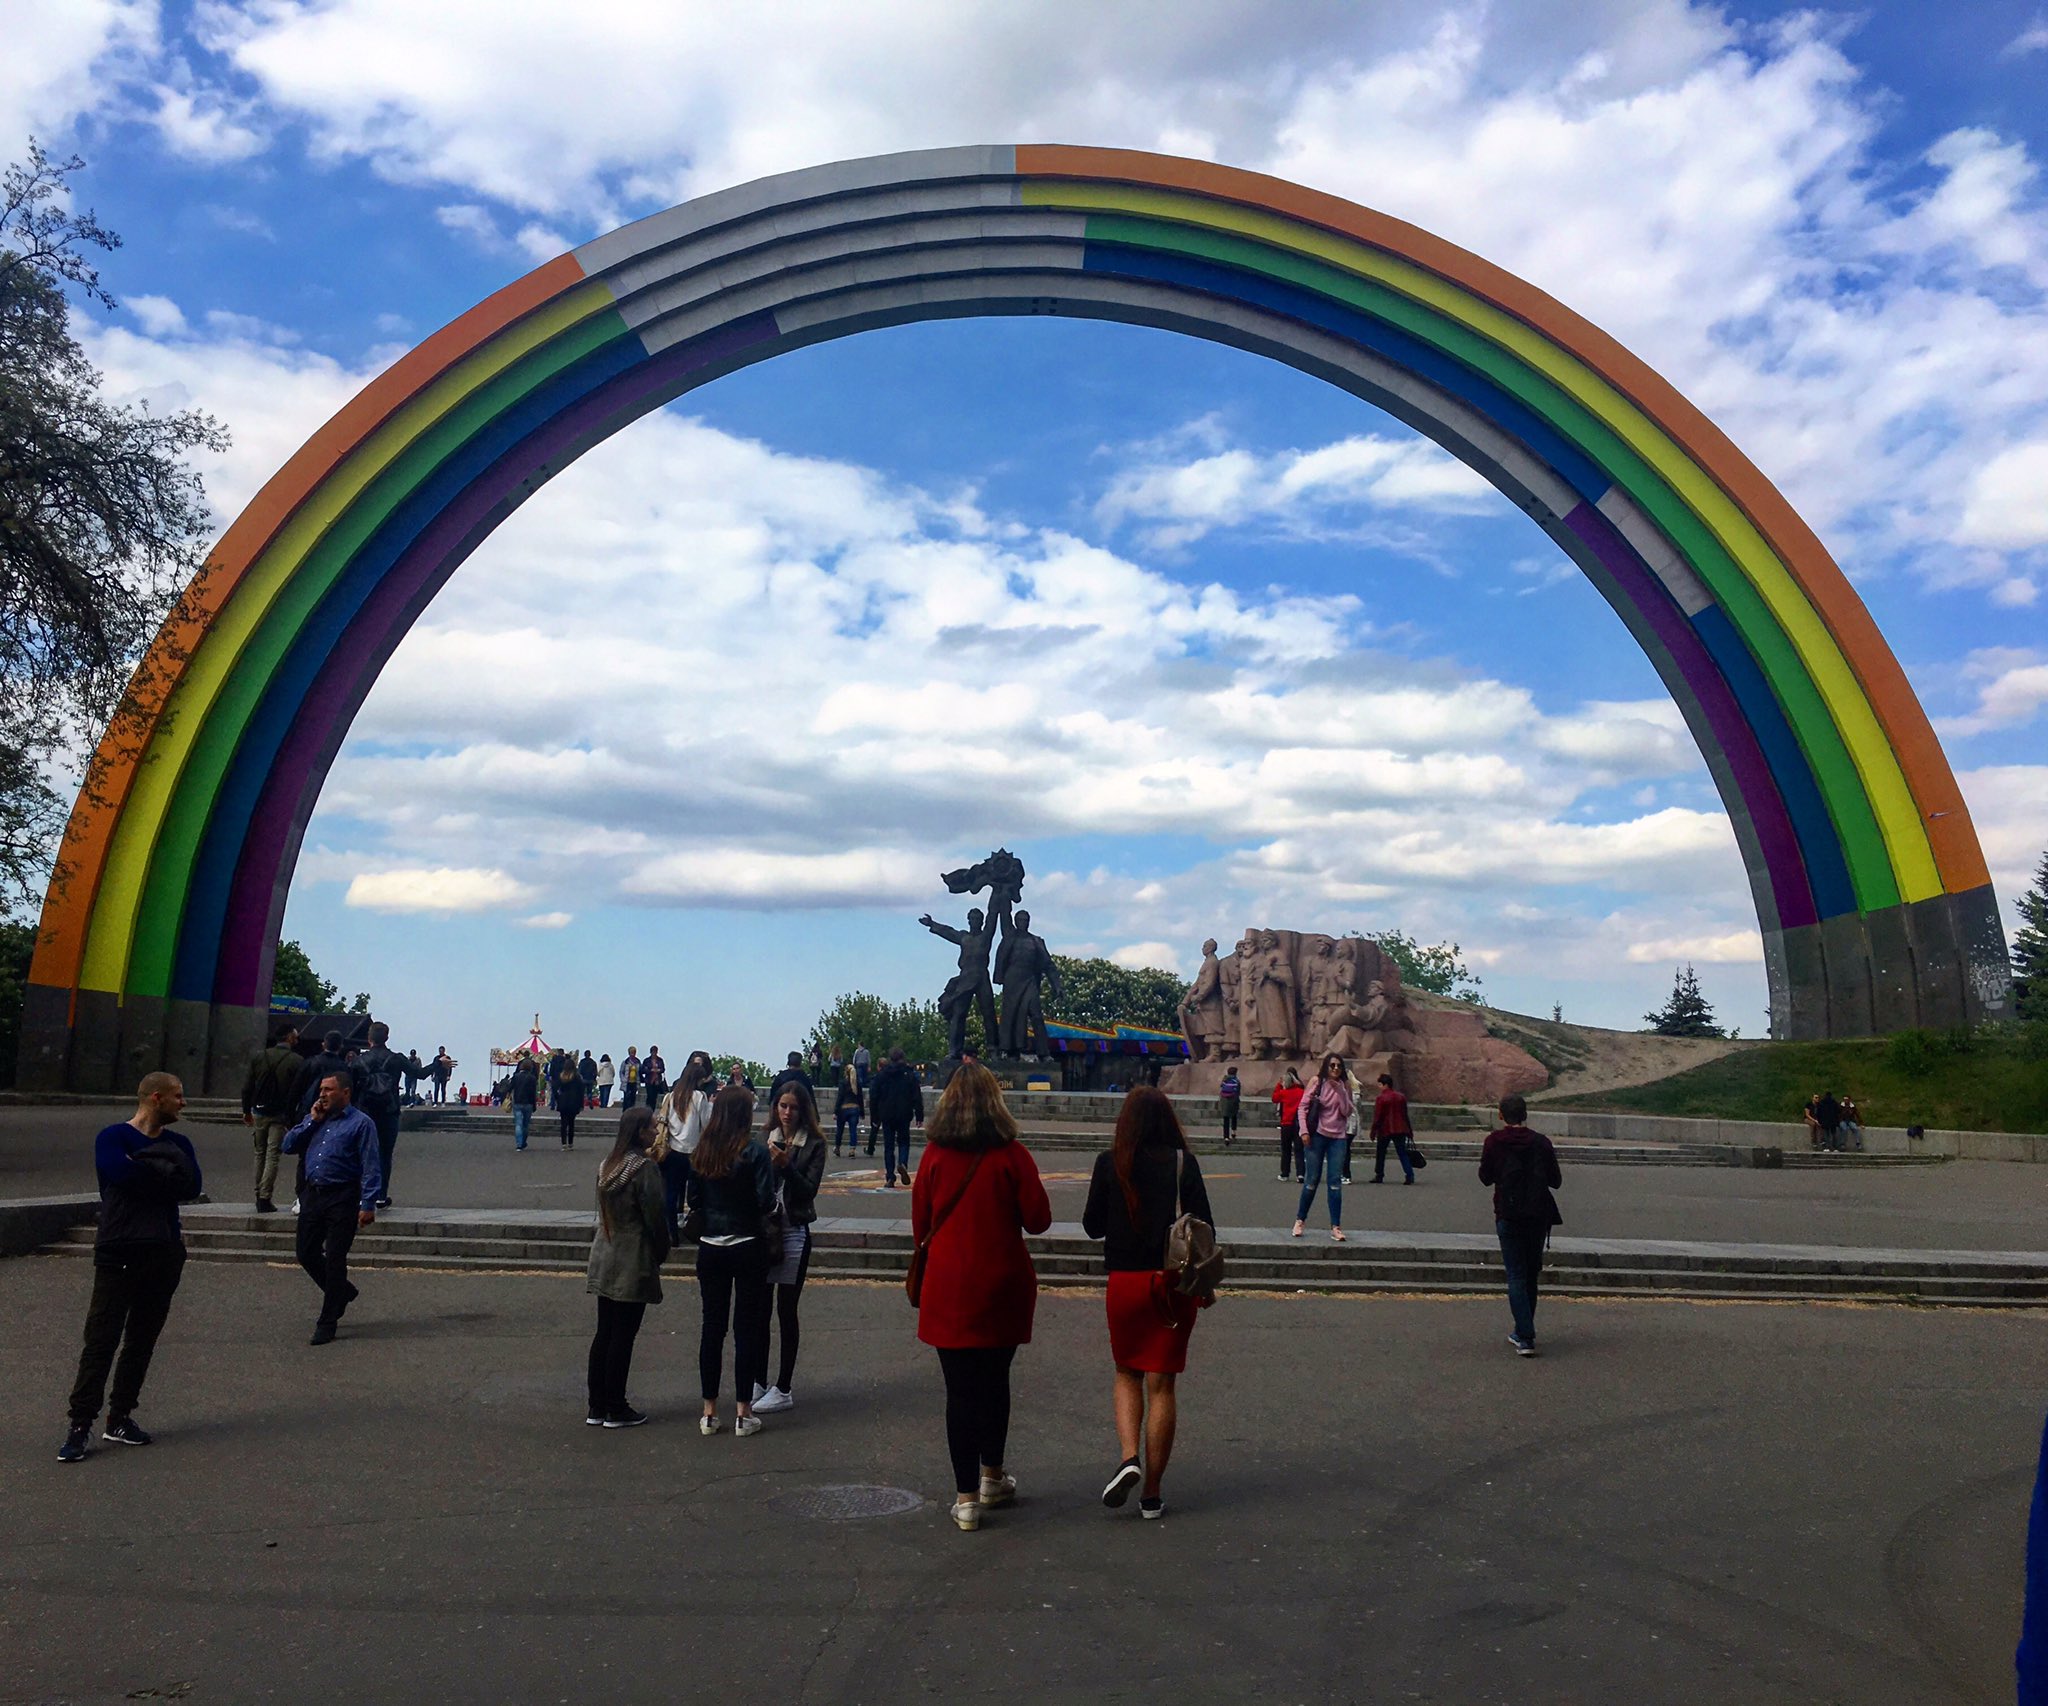 The Friendship of Nations Arch, an old Soviet monument in Kyiv, painted as a rainbow for the 2017 Eurovision Song Contest. The painting is unfinished to symbolize Ukraine's incomplete liberation from Russia. (Image: @DaveKeating via Twitter)